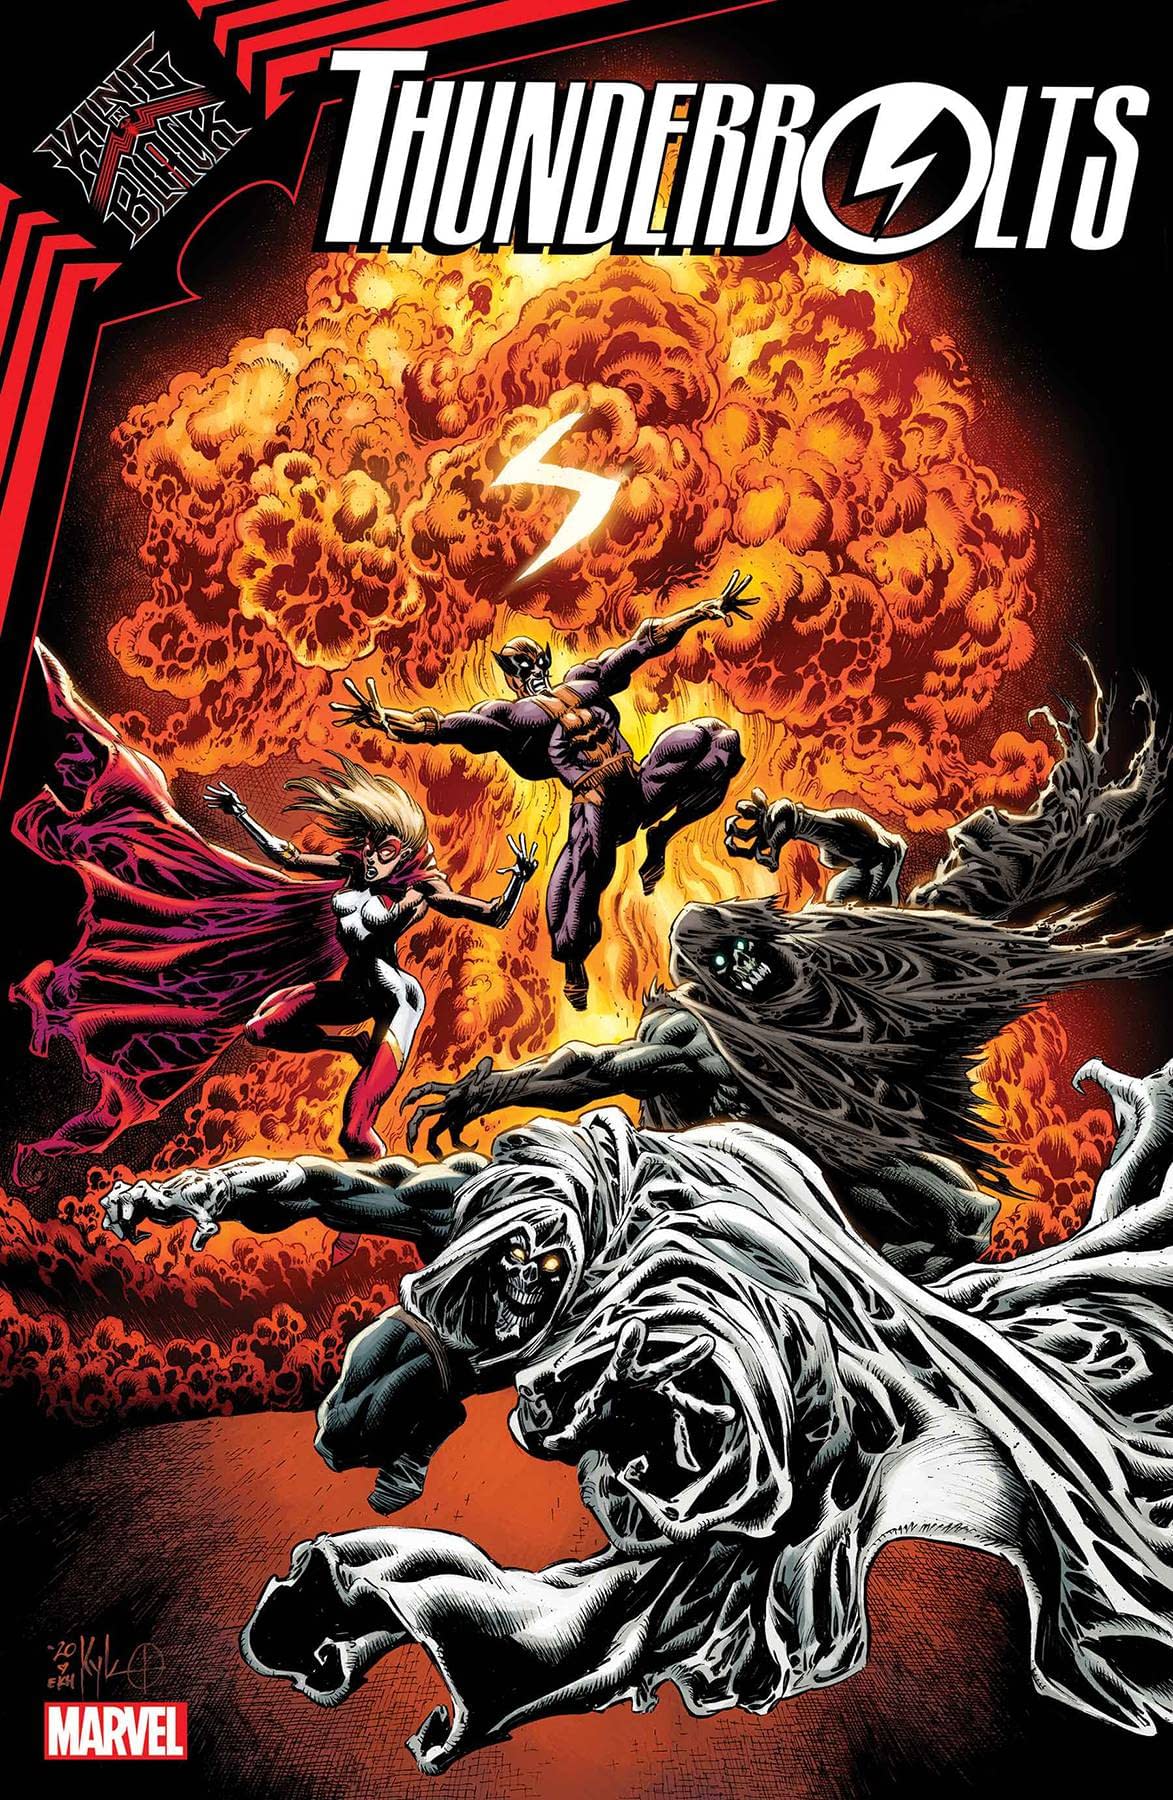 KING IN BLACK THUNDERBOLTS #3 (OF 3)